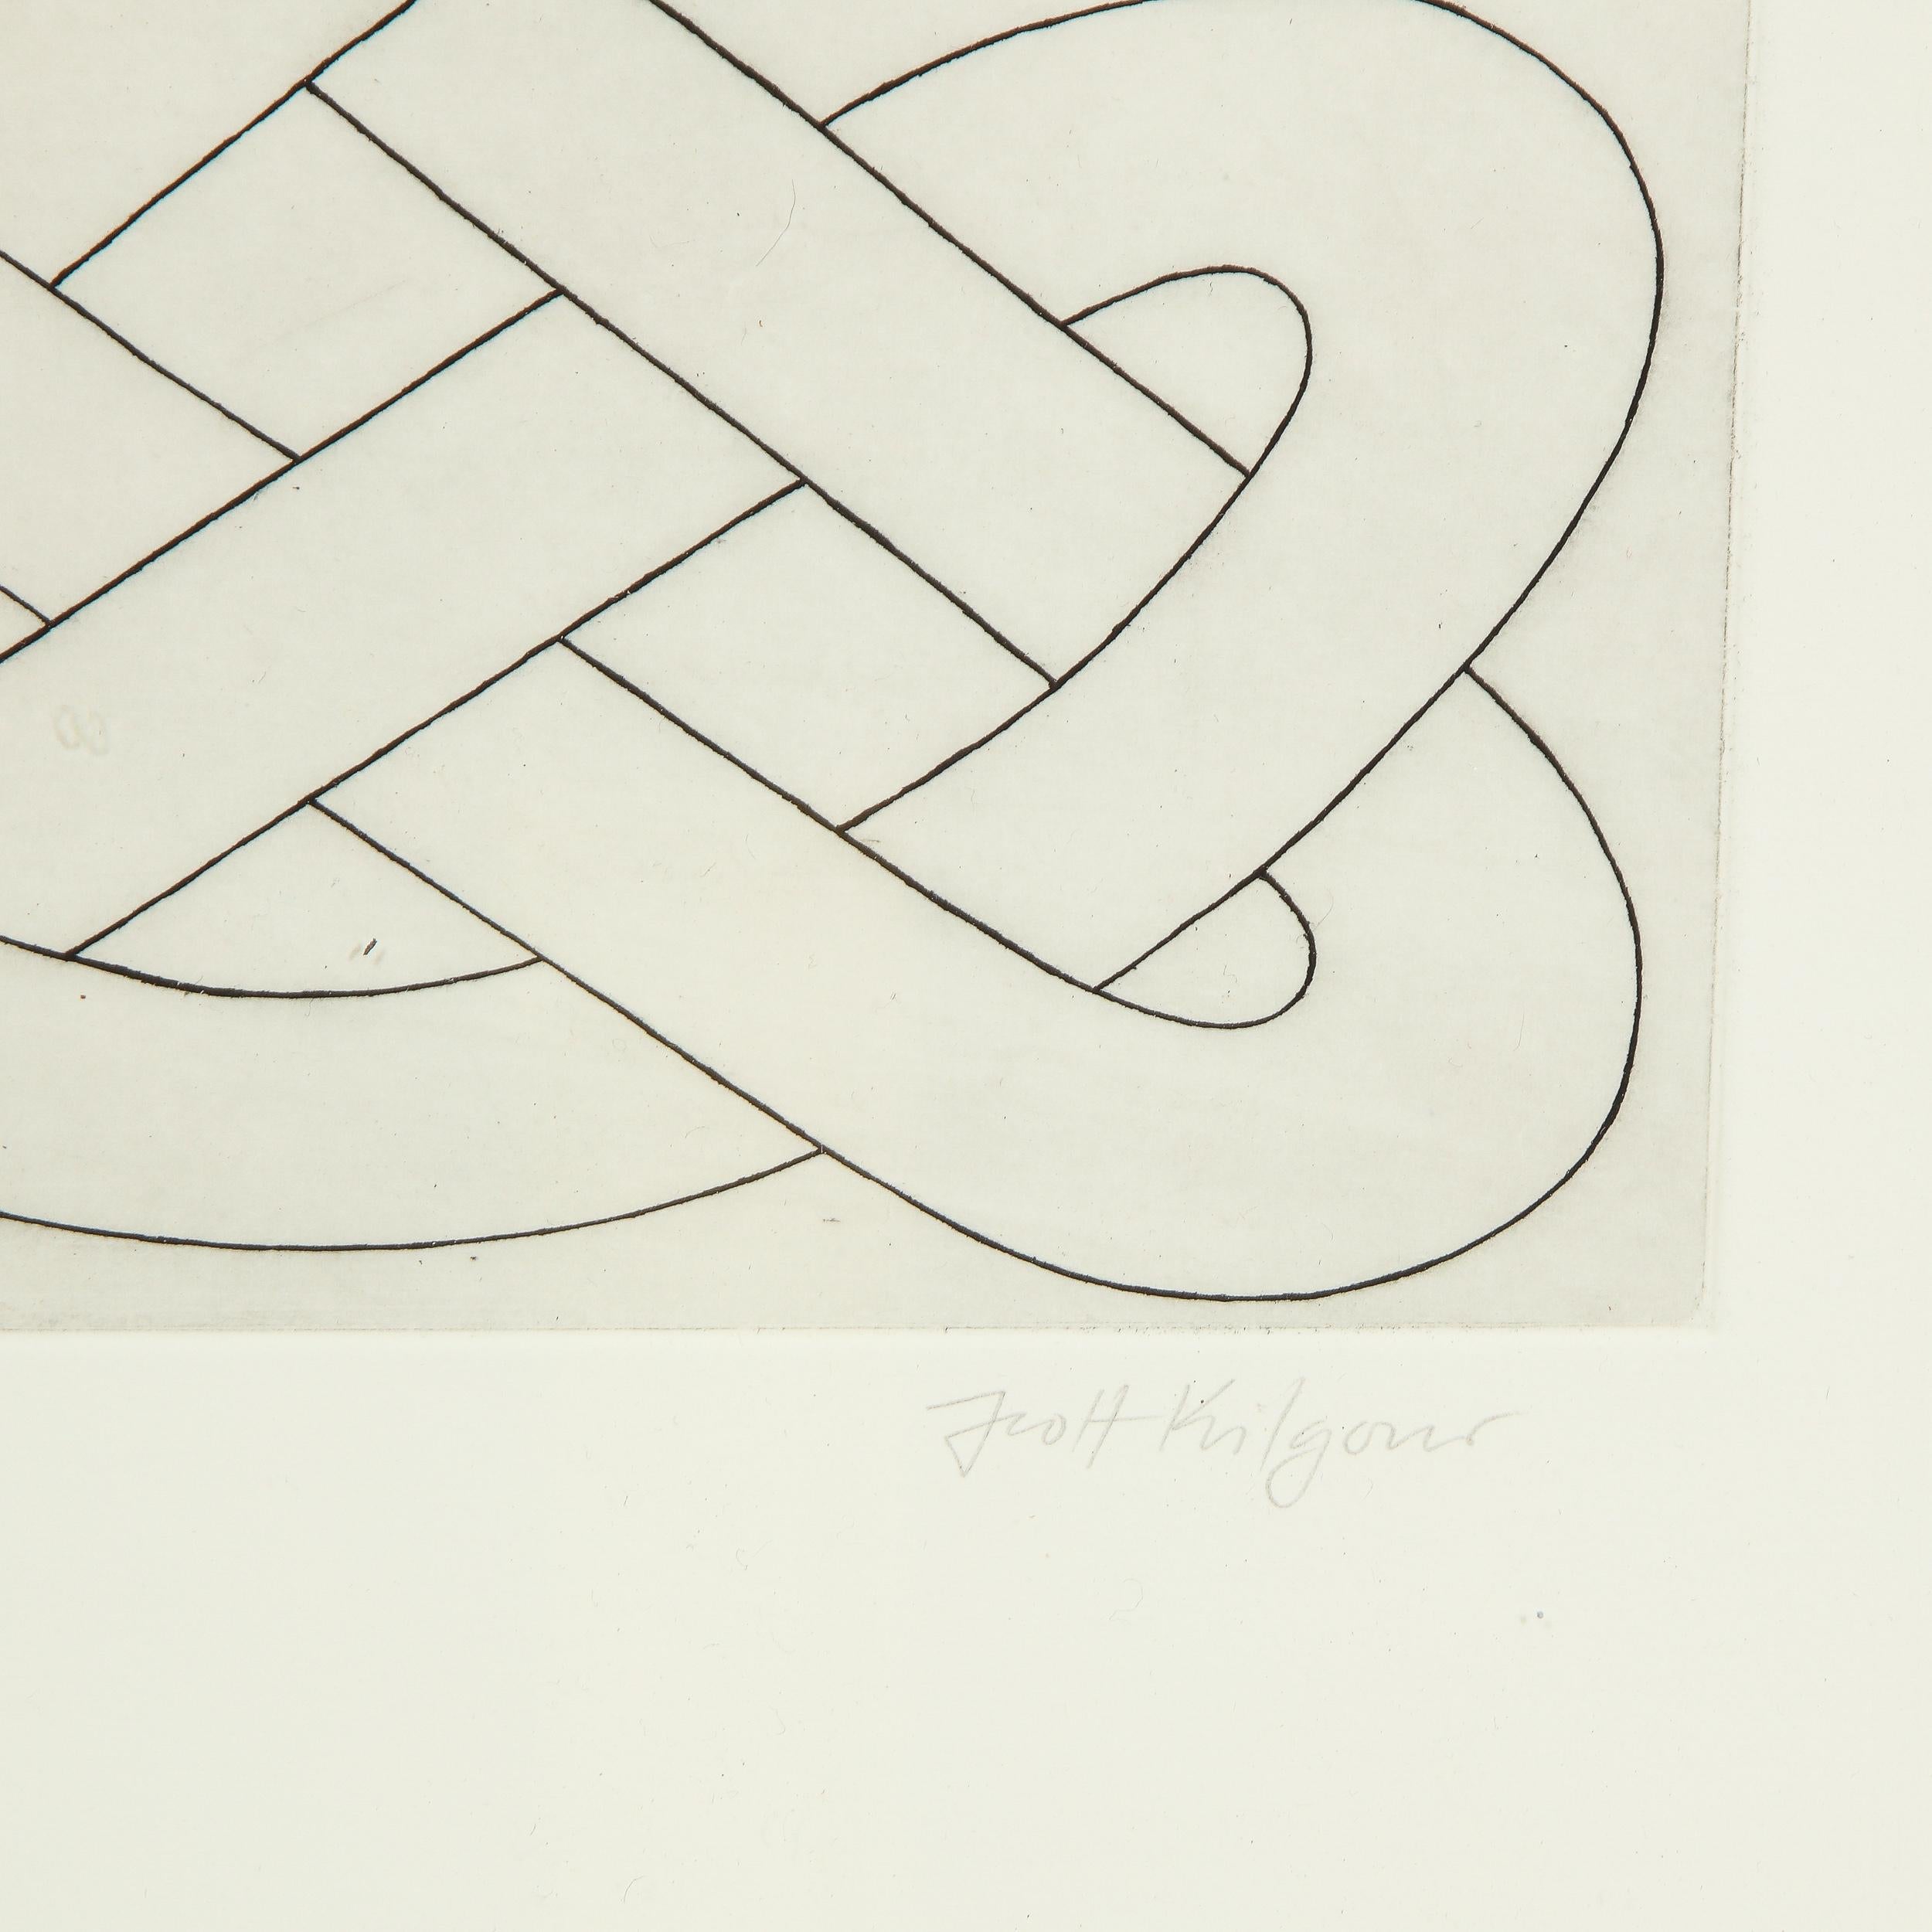 This stunning work was realized by the esteemed 20th century artist Scott Kilgour in the United States, circa 1990. It presents a celtic knot in black ink against a cream background. Perfect in its simplicity, this work would be a winning addition